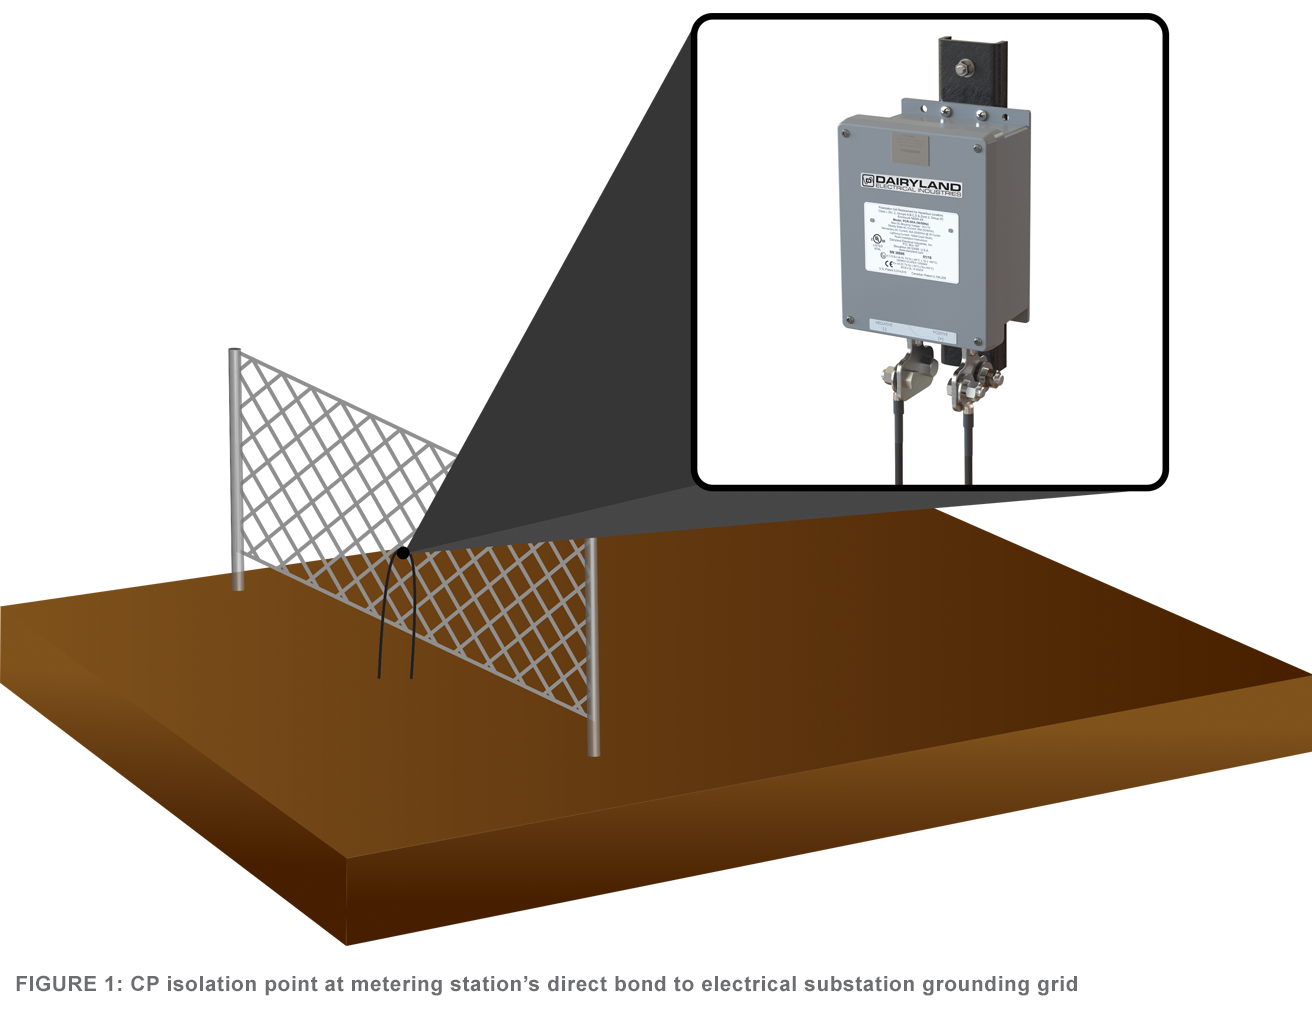 Figure 1: CP isolation point at the metering station's direct bond to electrical substation grounding grid